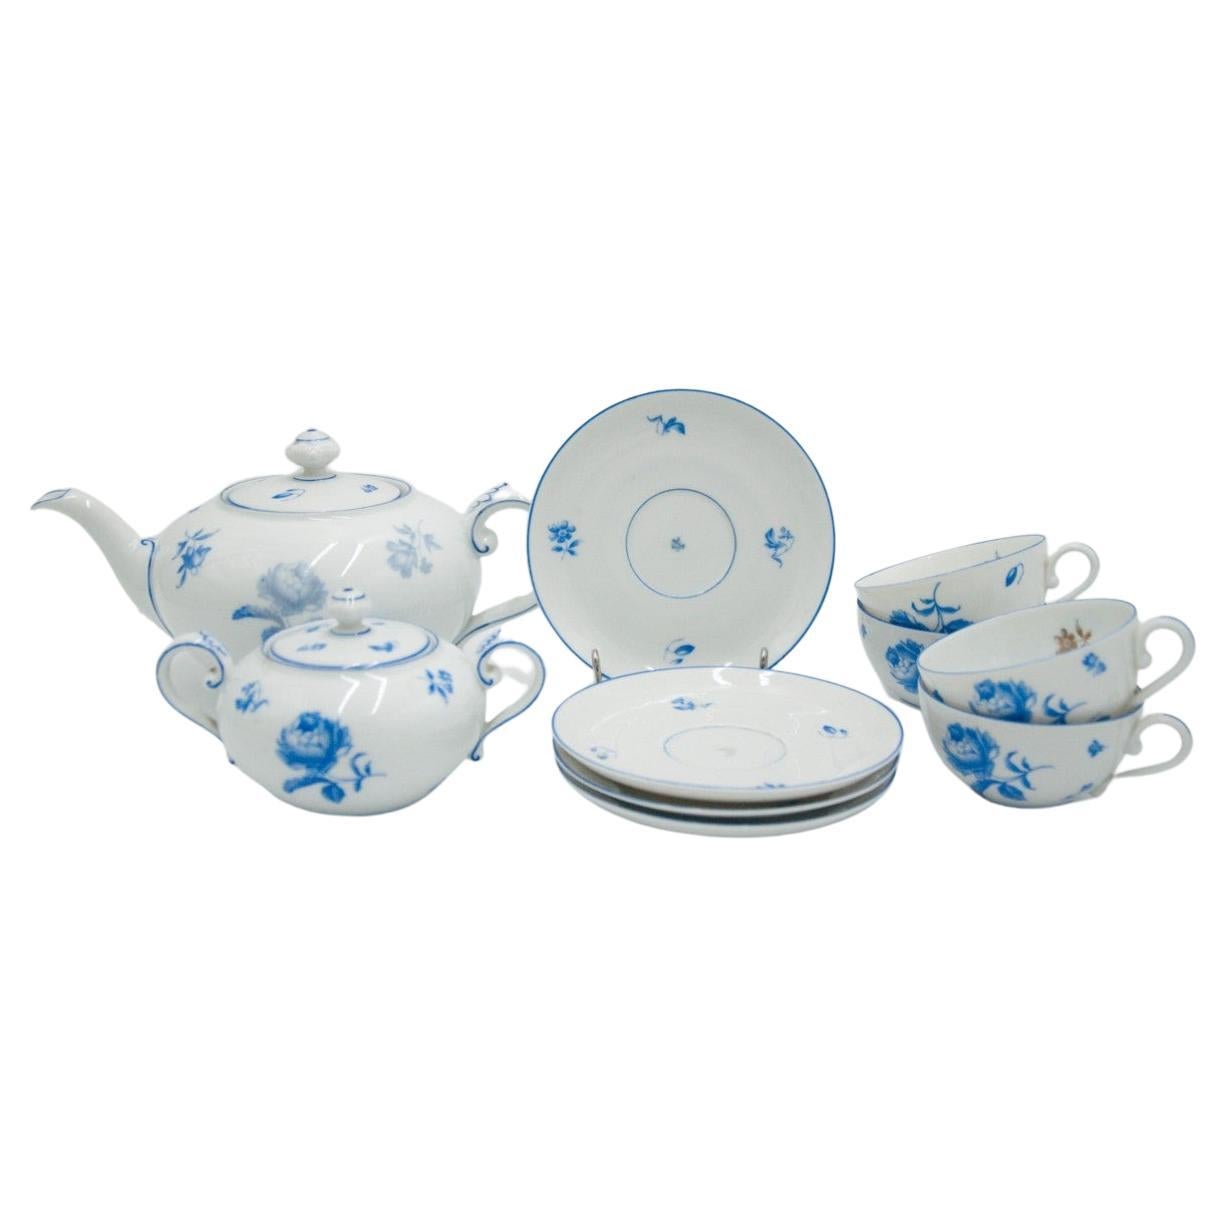 Rosenthal Porcelain Coffee Set, Germany, 1923-1925 For Sale